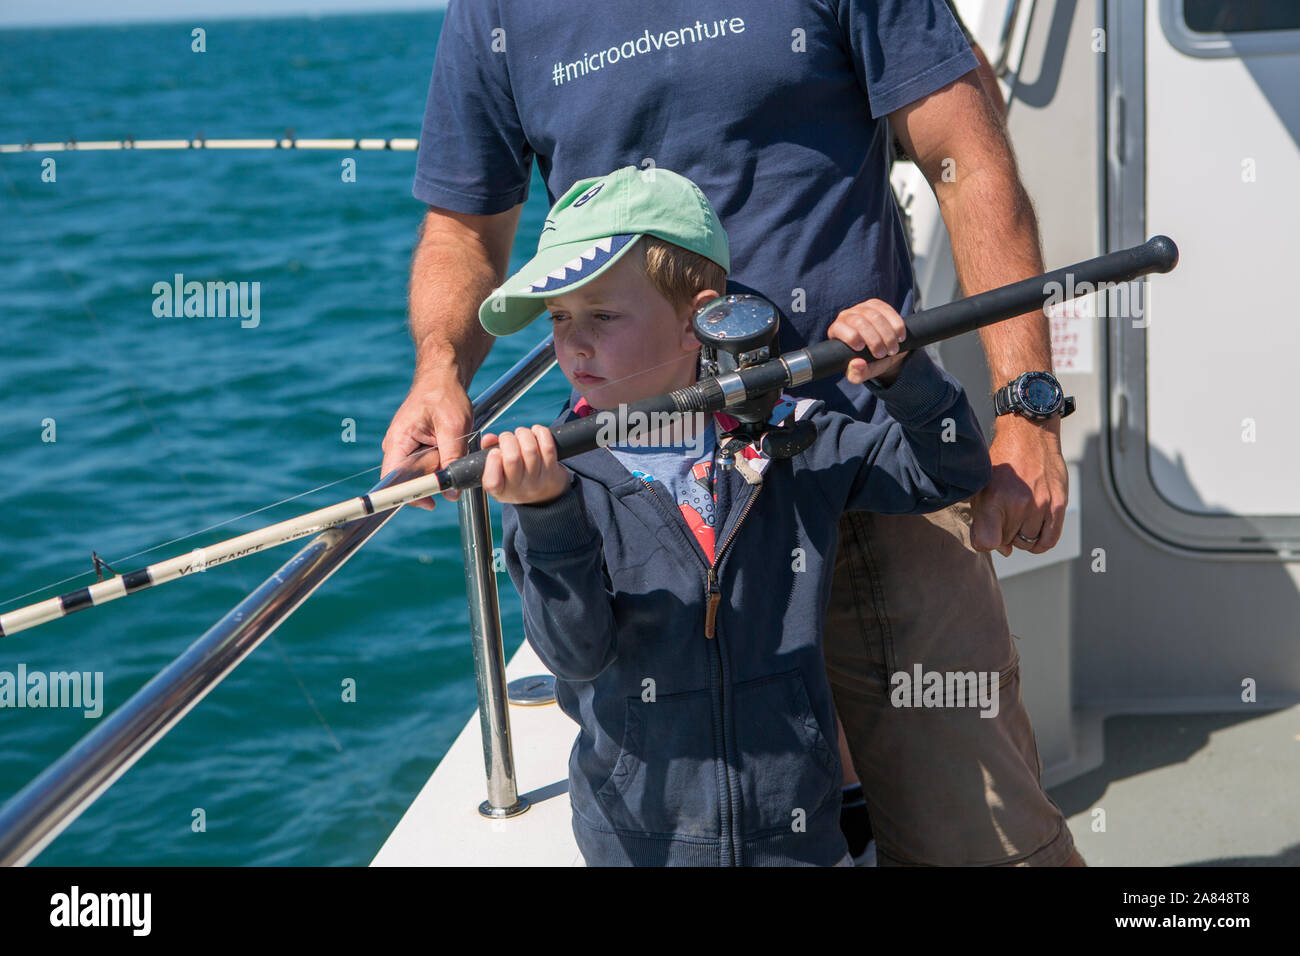 https://c8.alamy.com/comp/2A848T8/a-young-boy-holding-a-sea-fishing-rod-on-a-boat-at-sea-devon-uk-2A848T8.jpg